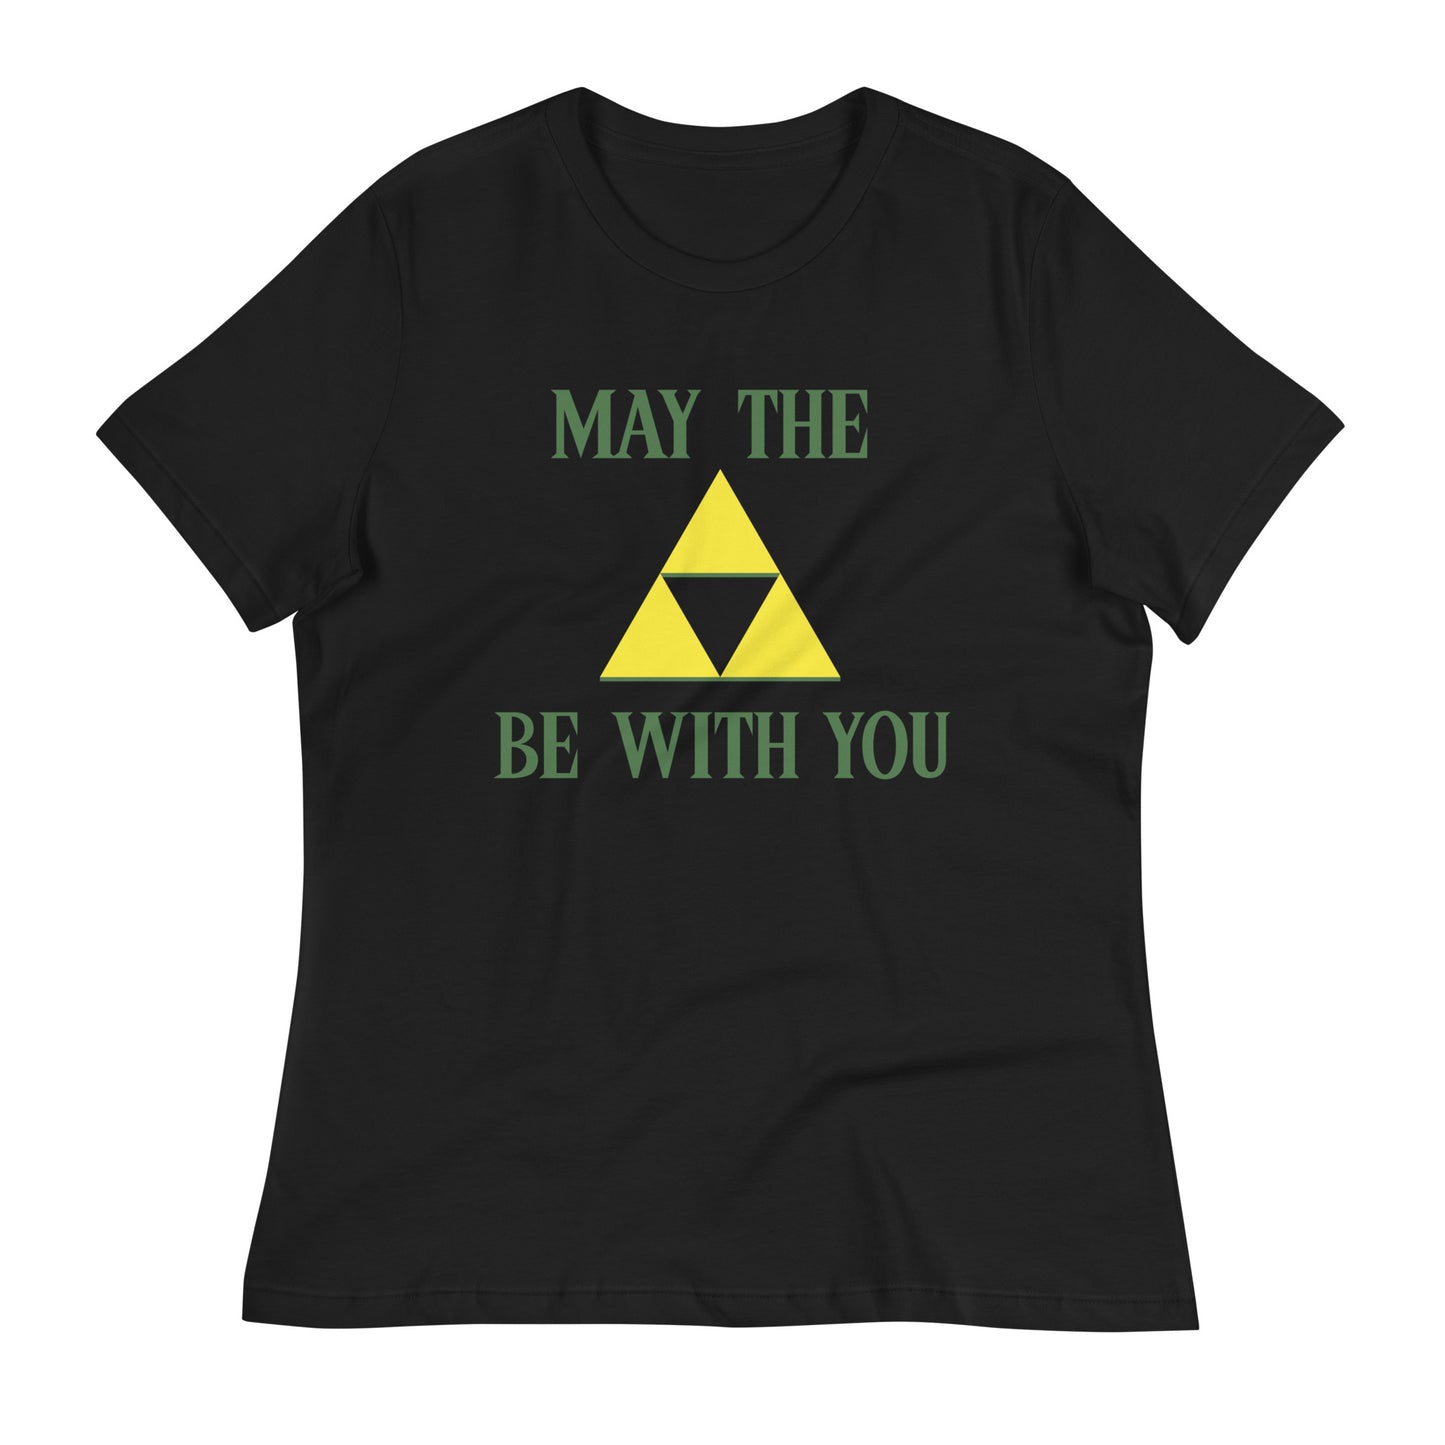 A Link To The Force Women's Signature Tee